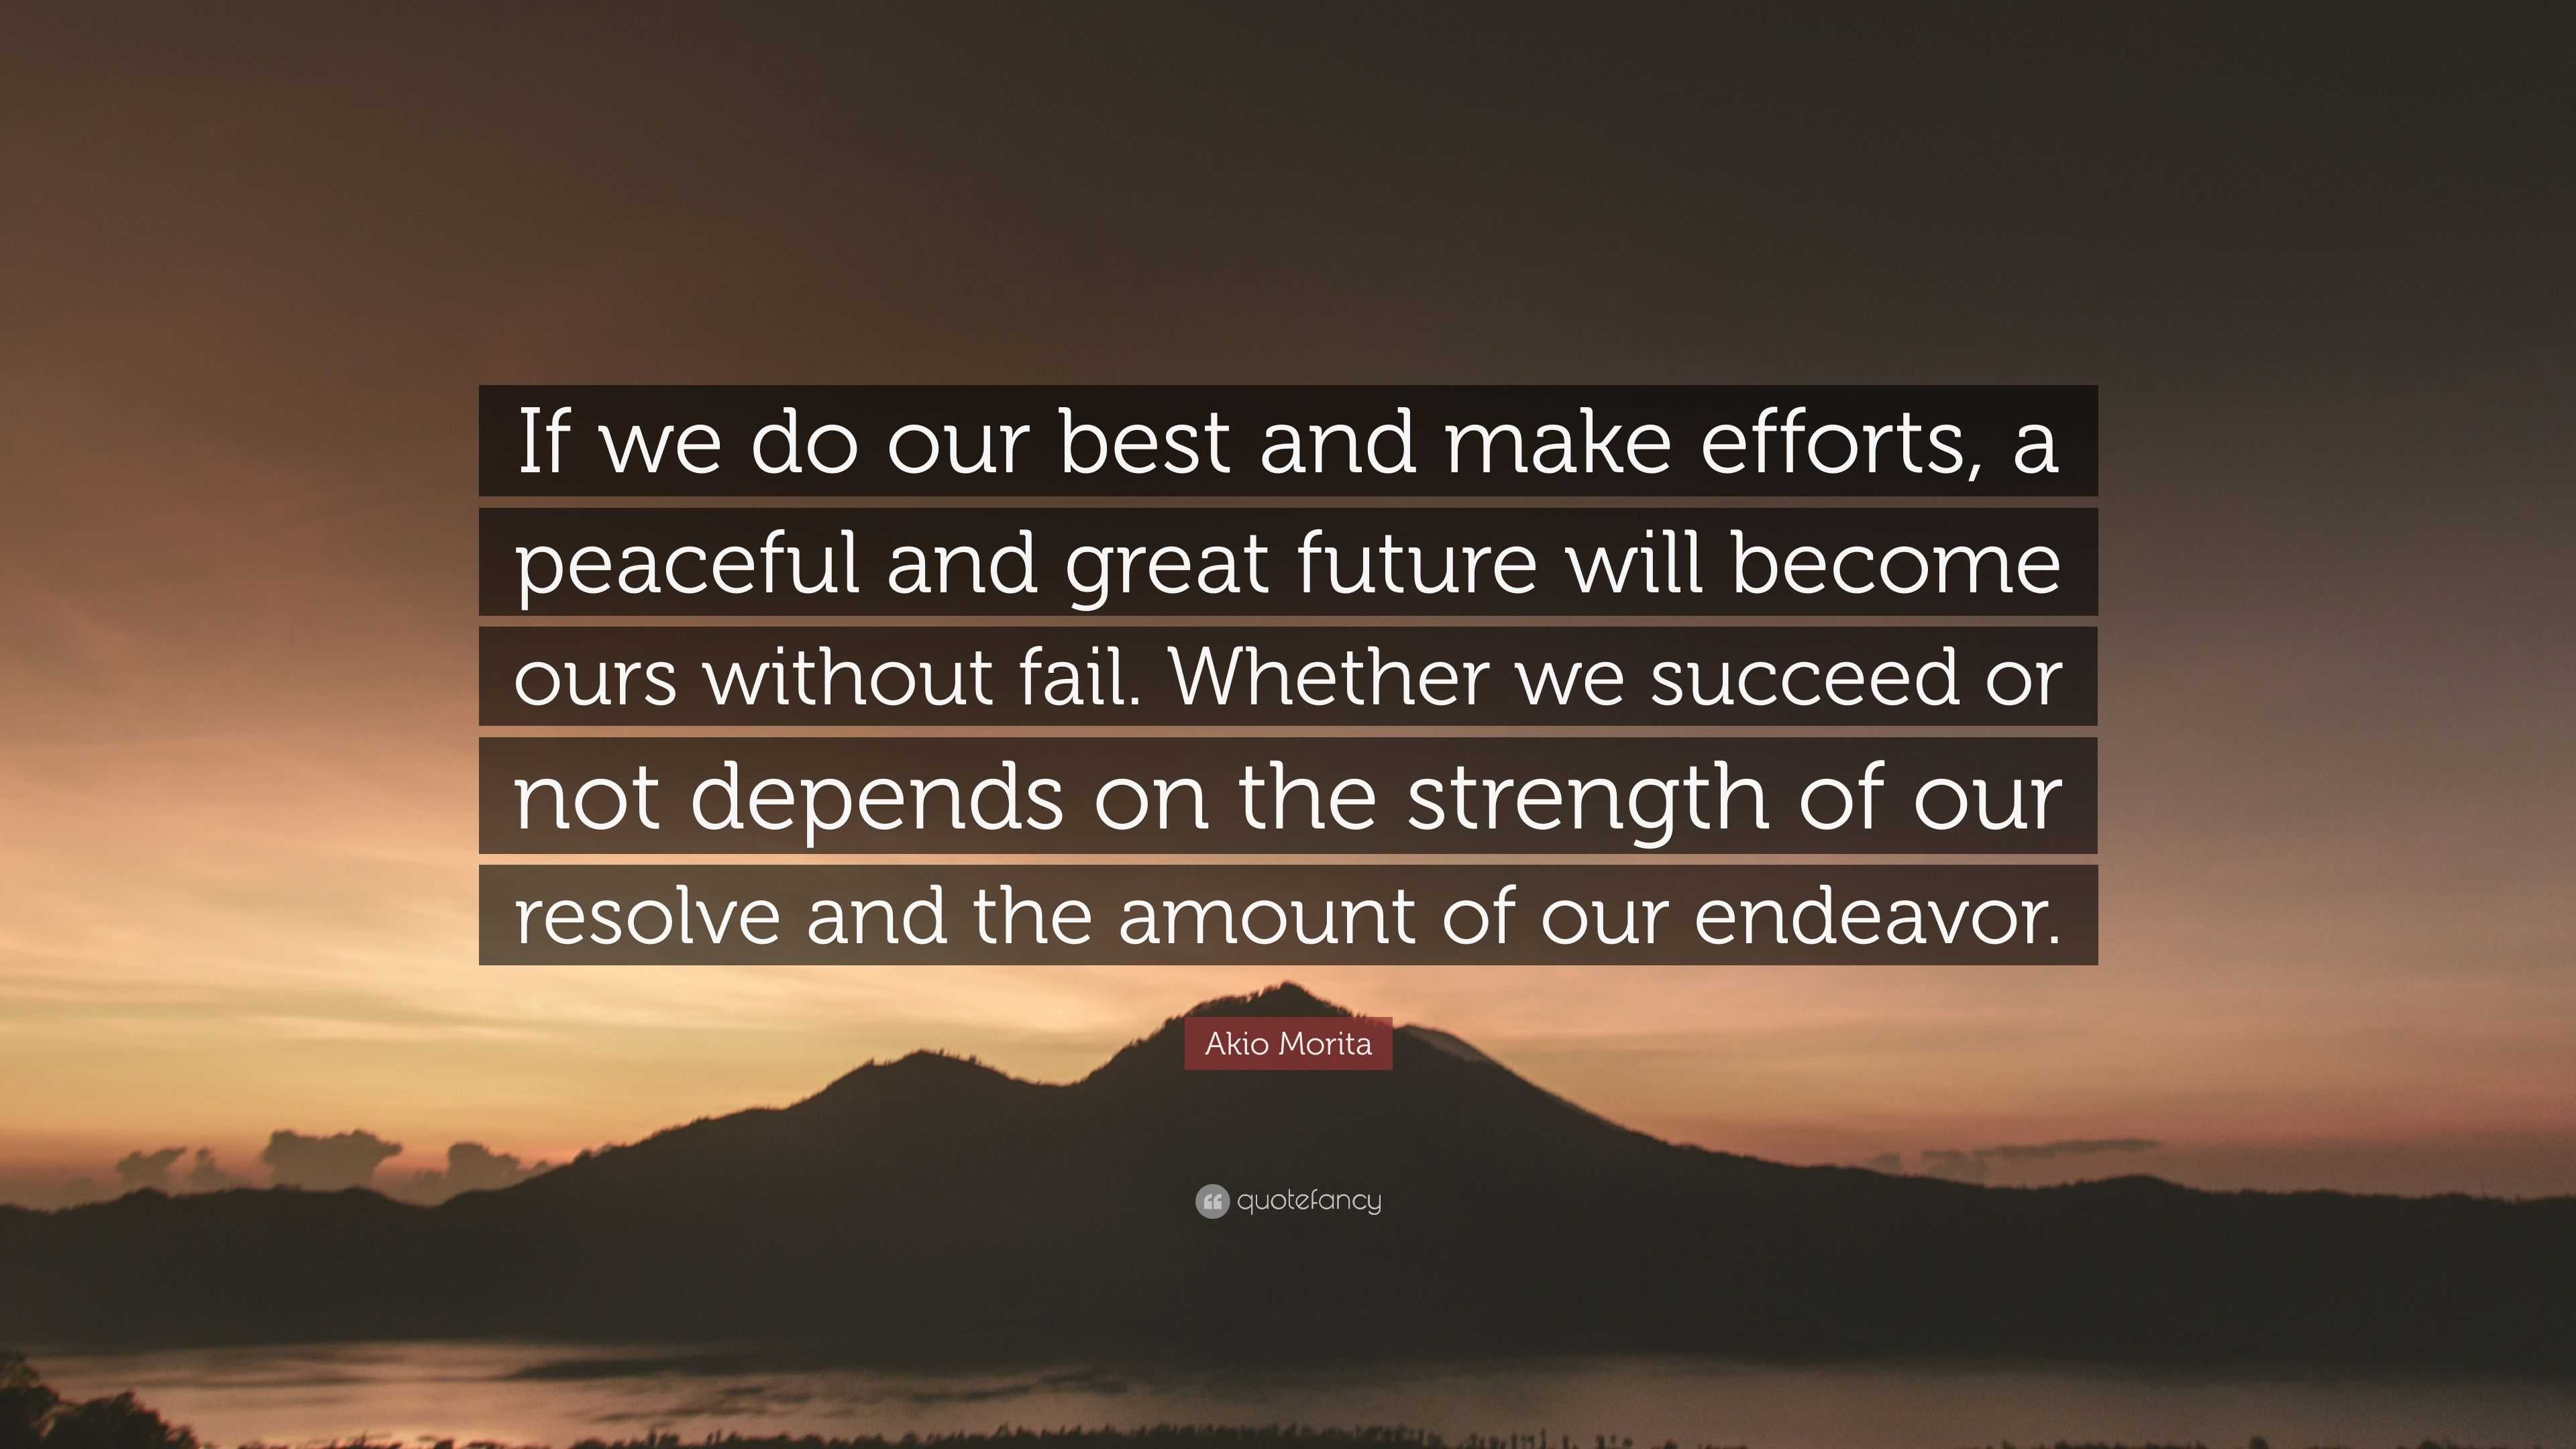 Akio Morita Quote: “If we do our best and make efforts, a peaceful and ...